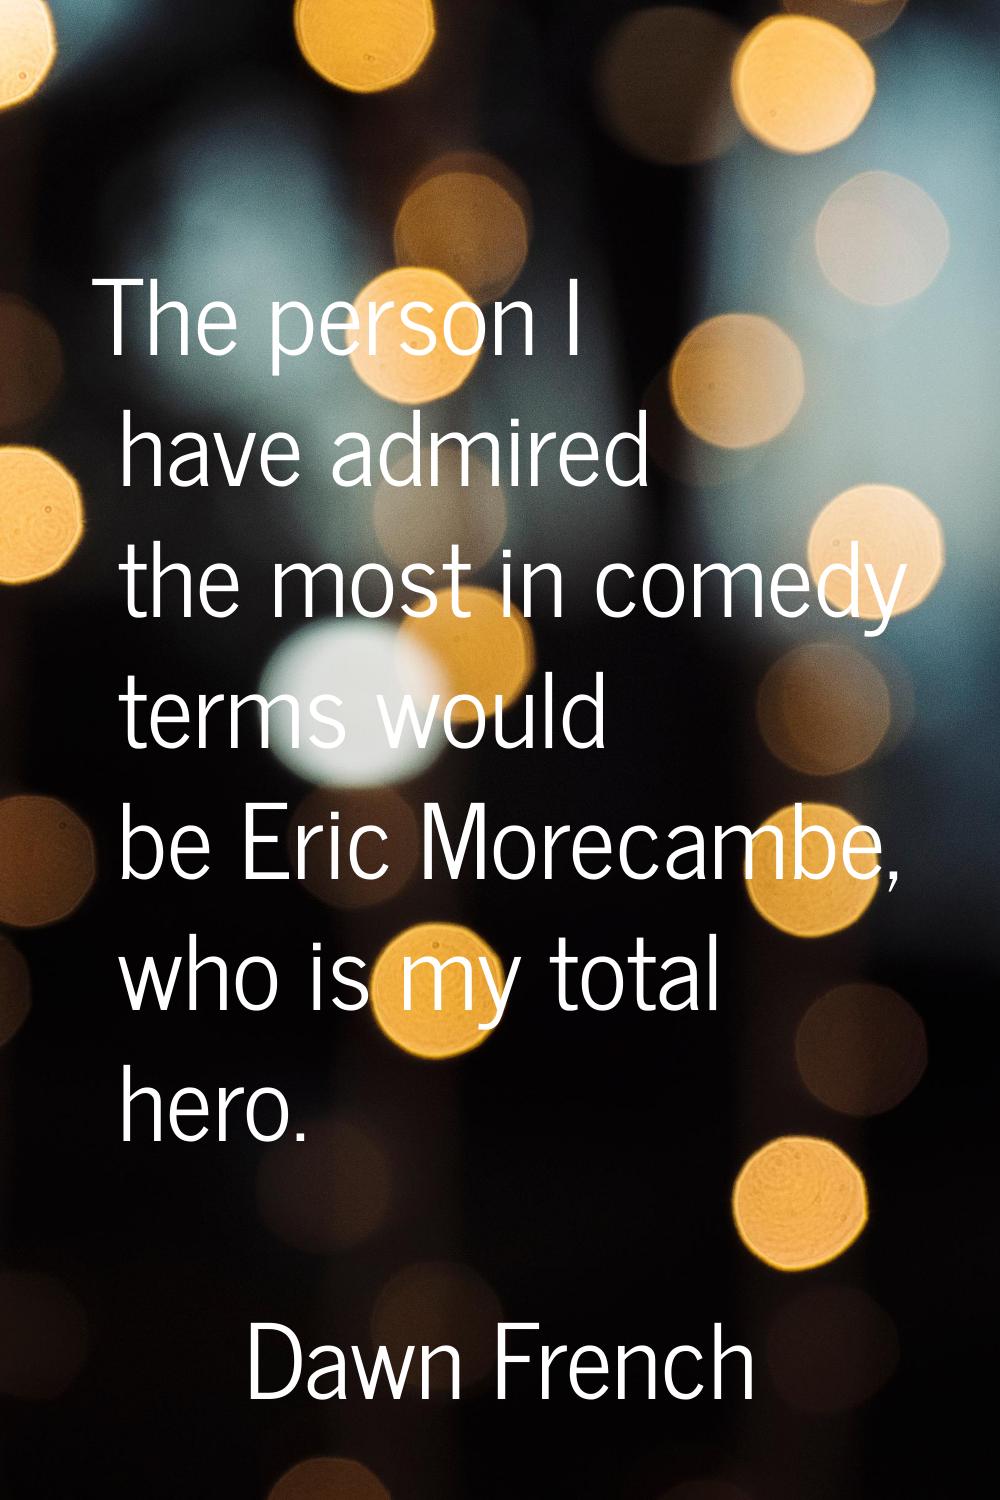 The person I have admired the most in comedy terms would be Eric Morecambe, who is my total hero.